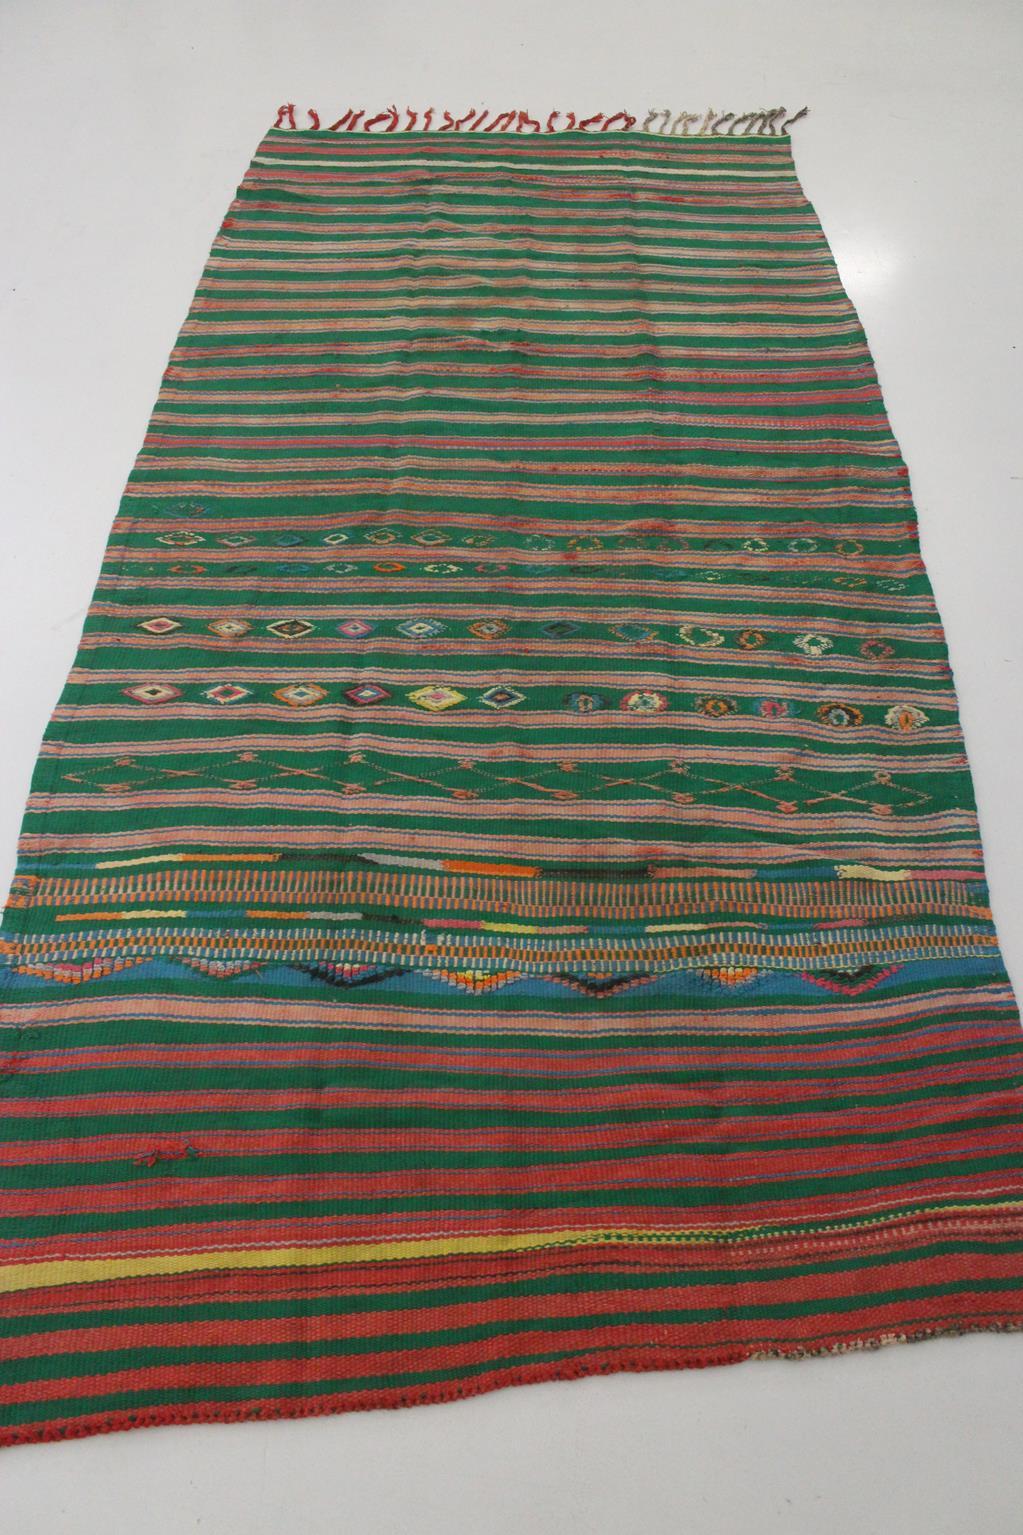 Hand-Woven Vintage Moroccan striped kilim rug - Green/pink/red - 5.1x10.2feet / 157x312cm For Sale